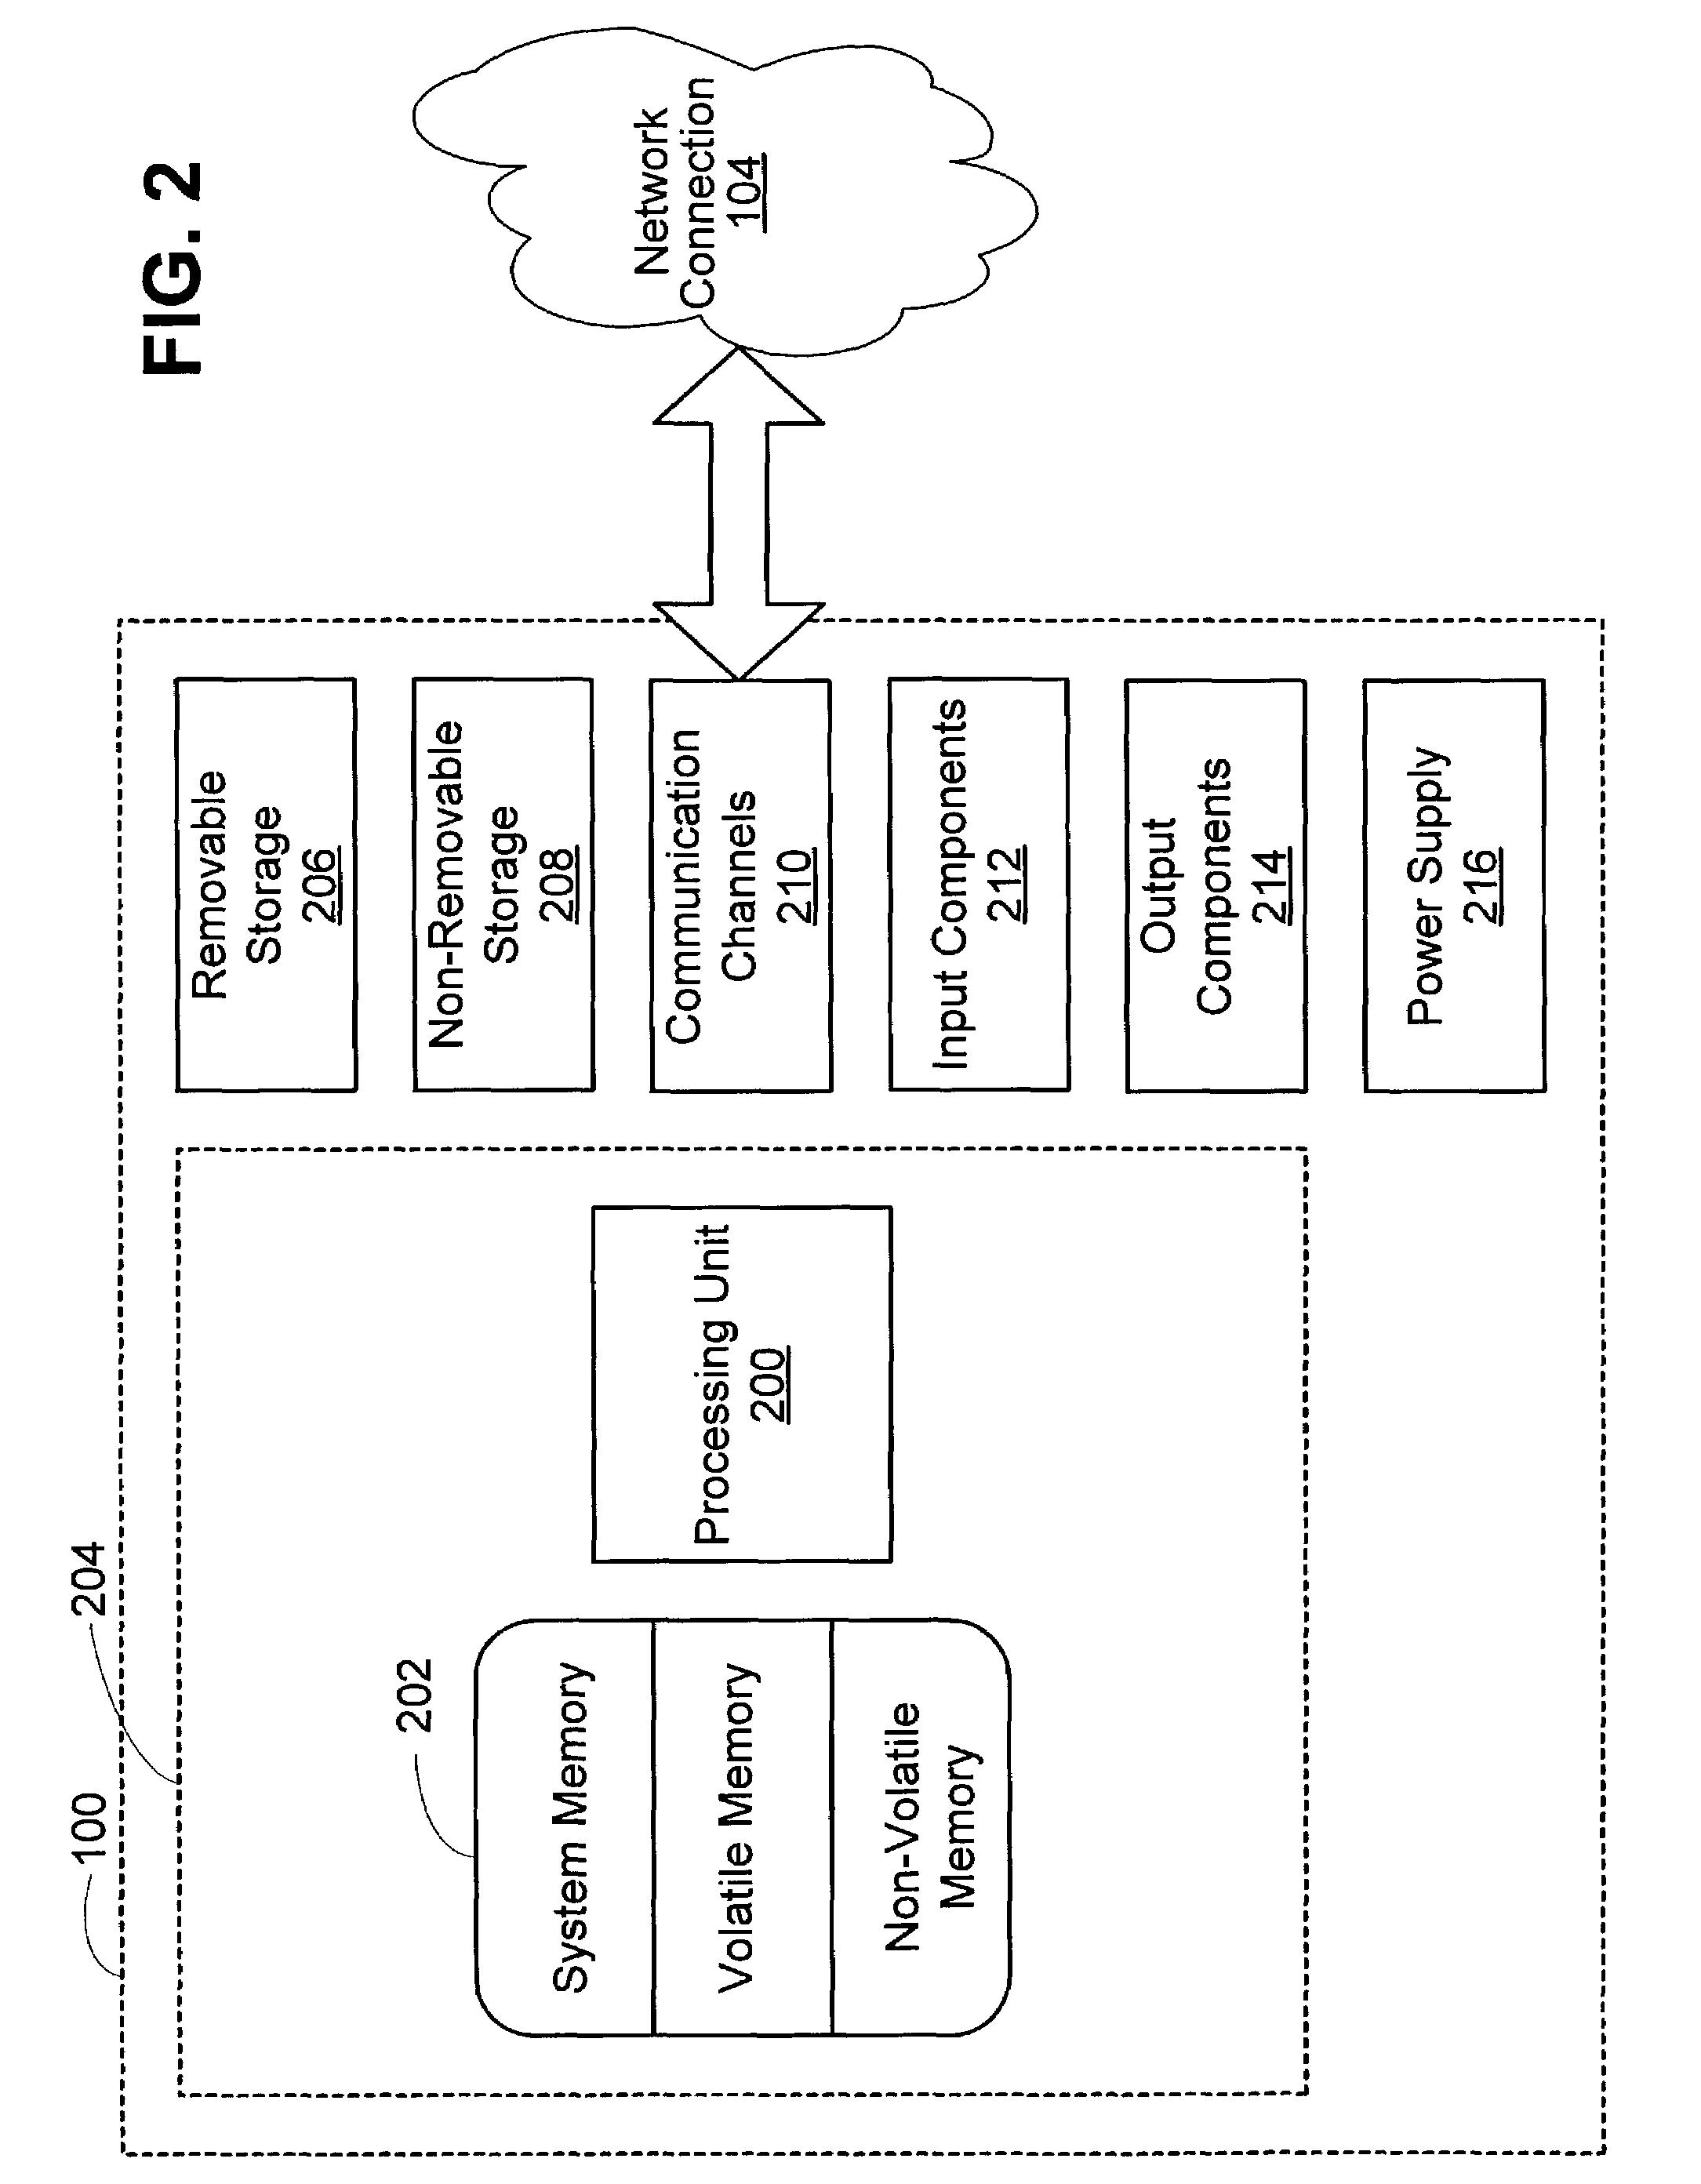 Methods and systems for frustrating statistical attacks by injecting pseudo data into a data system